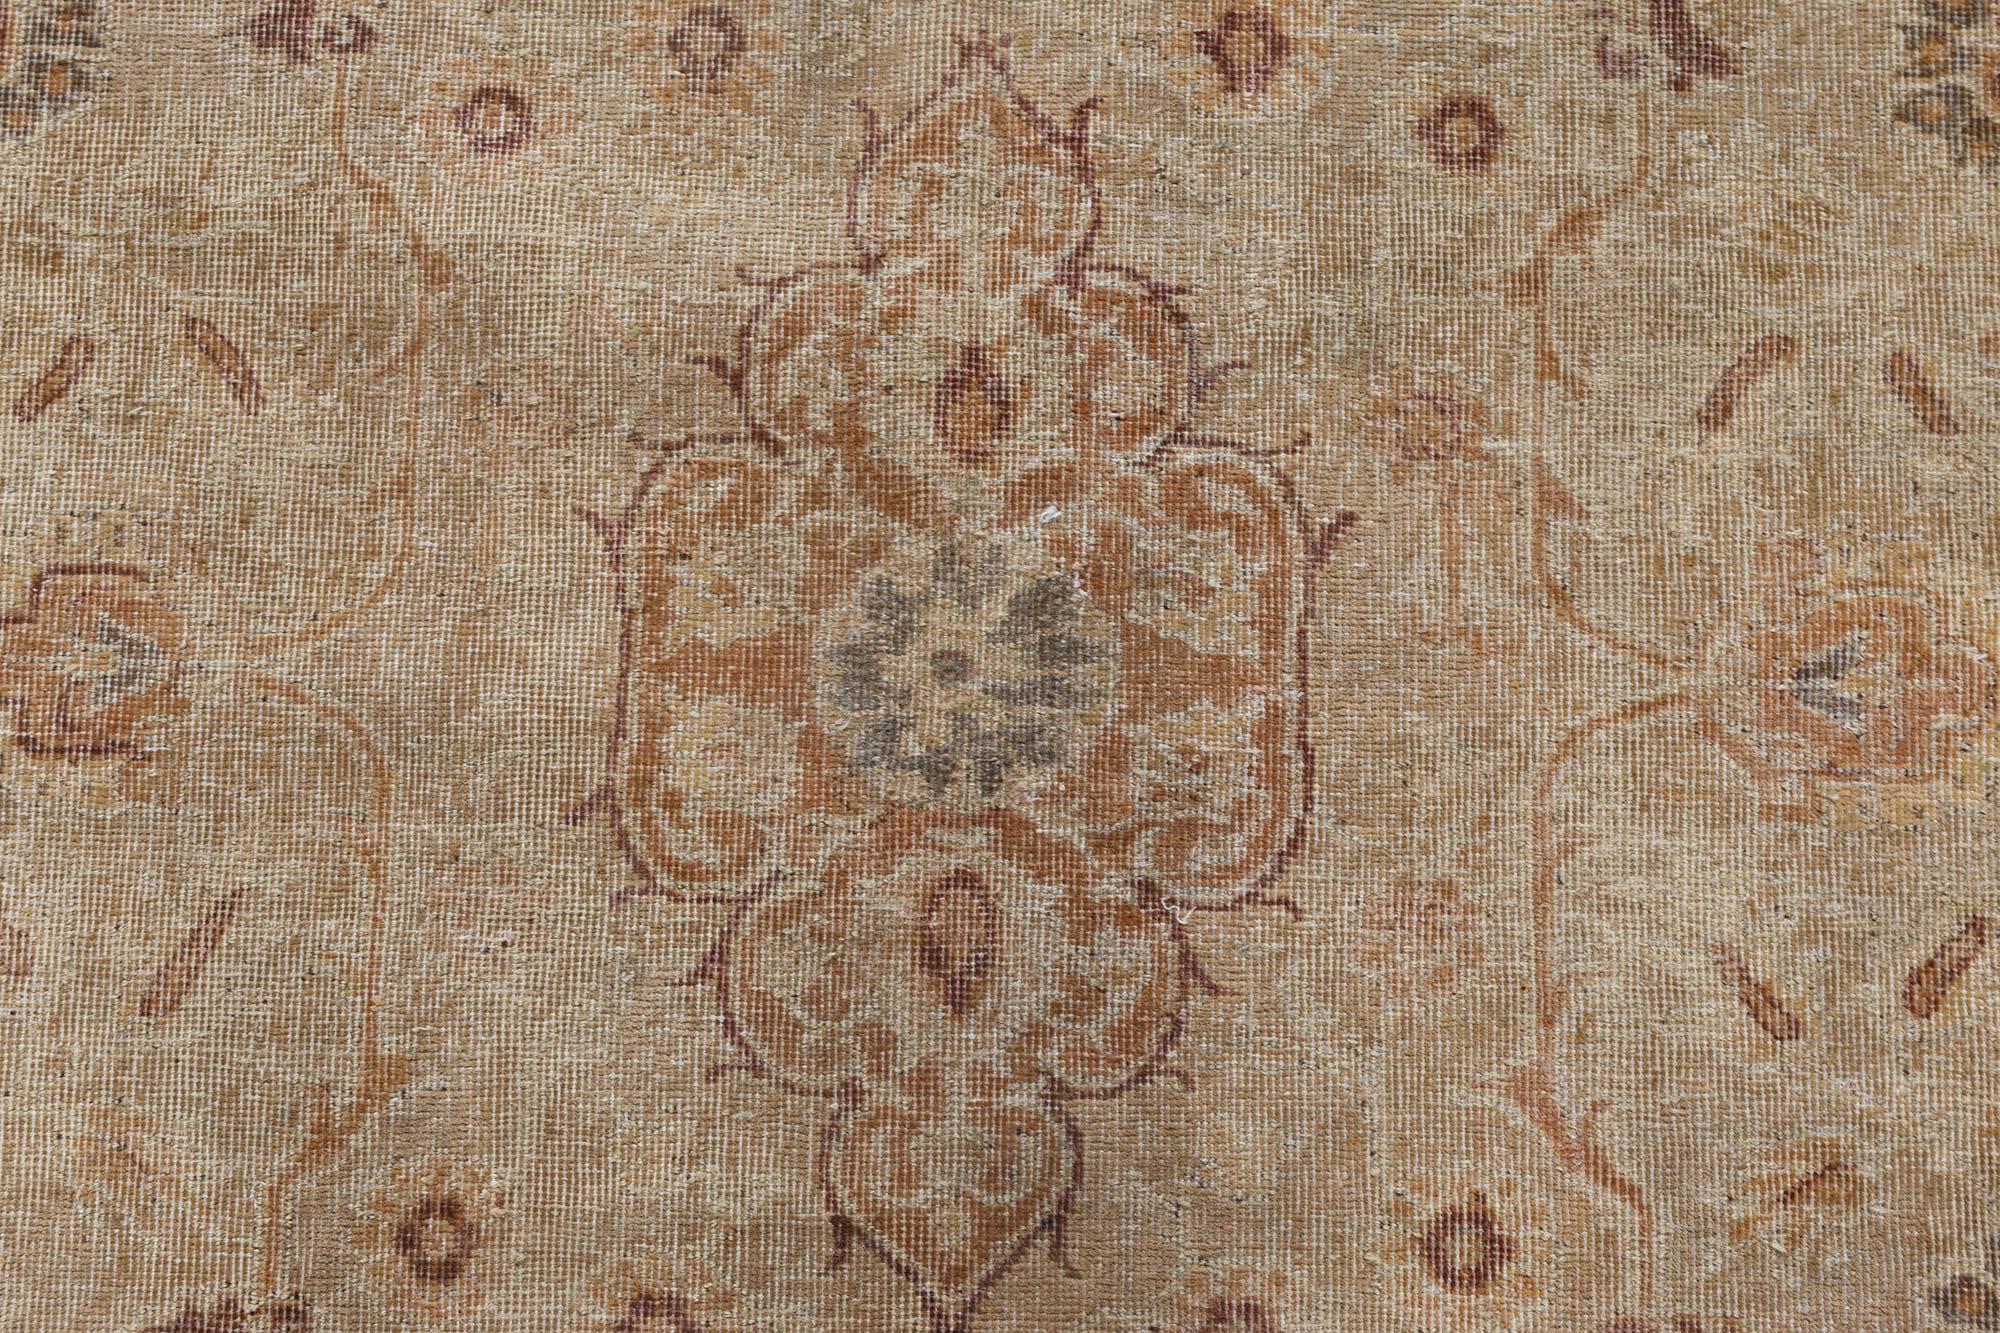 Early 20th Century Indian Handmade Wool Rug In Good Condition For Sale In New York, NY